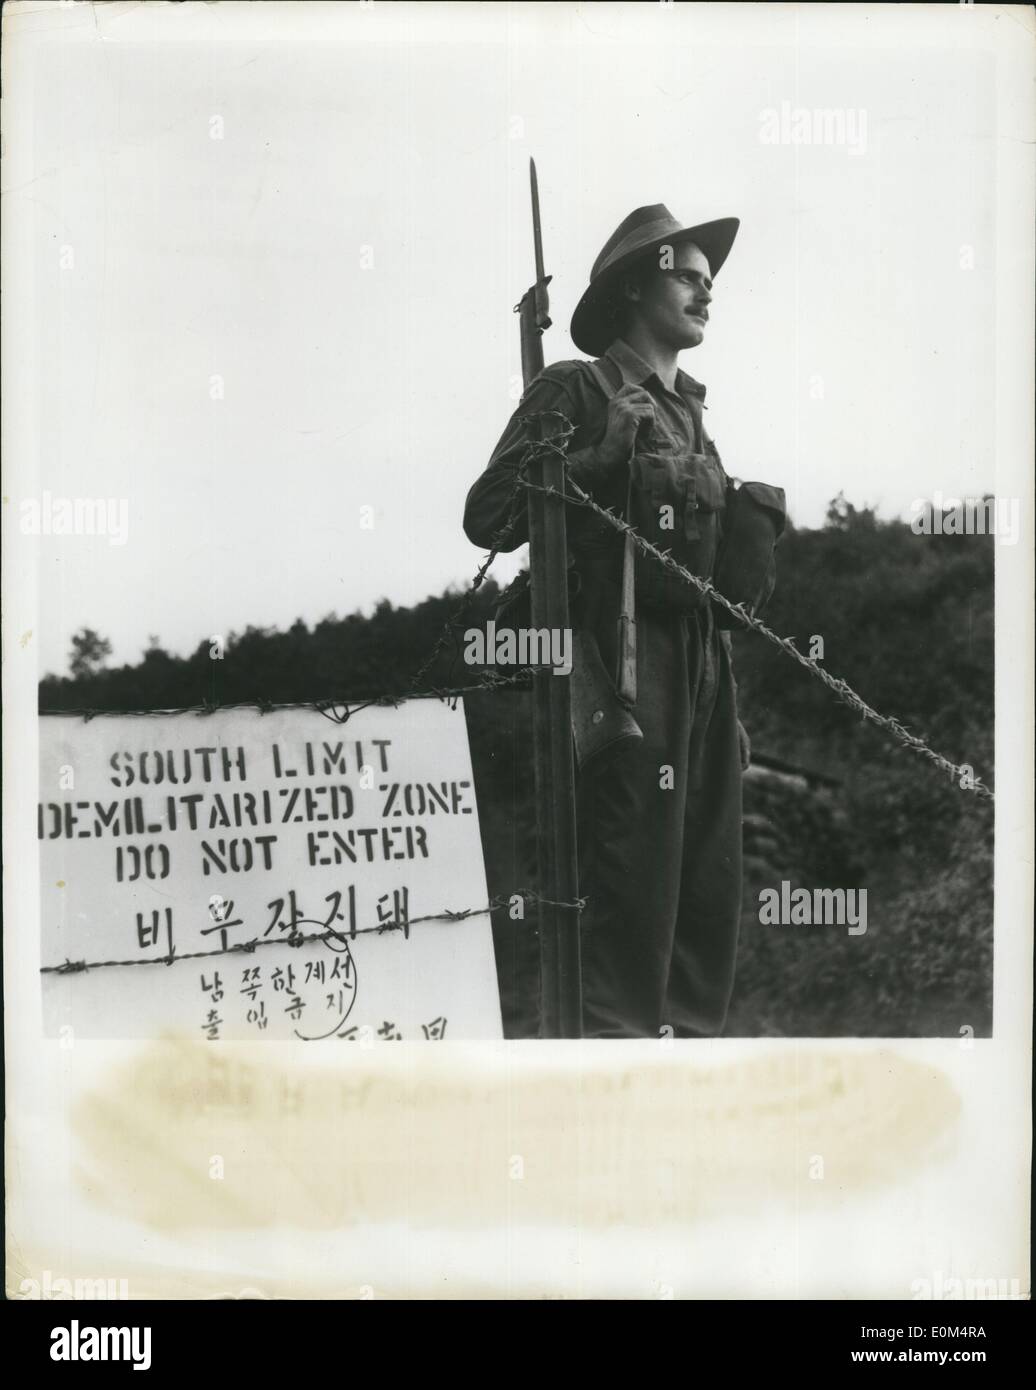 Aug. 08, 1953 - Guarding The Truce In Korea: While negotiations are under way for a lasting peace in Korea, war-weary soldiers stand guard along the 2 1/2 mile demilitarized zone to watch for truce violations. Photo shows. Private Terry Mahoney of the 3rd Batallion, Royal Australian Regiment, charged with keeping sightseers and other unauthorized people out of the armistice demilitarized zone stands guard on a road crossing its southern limits. Soldiers from countries of the British Commonwealth have fought by the side of Americans since the first months of the war in Korea. Stock Photo